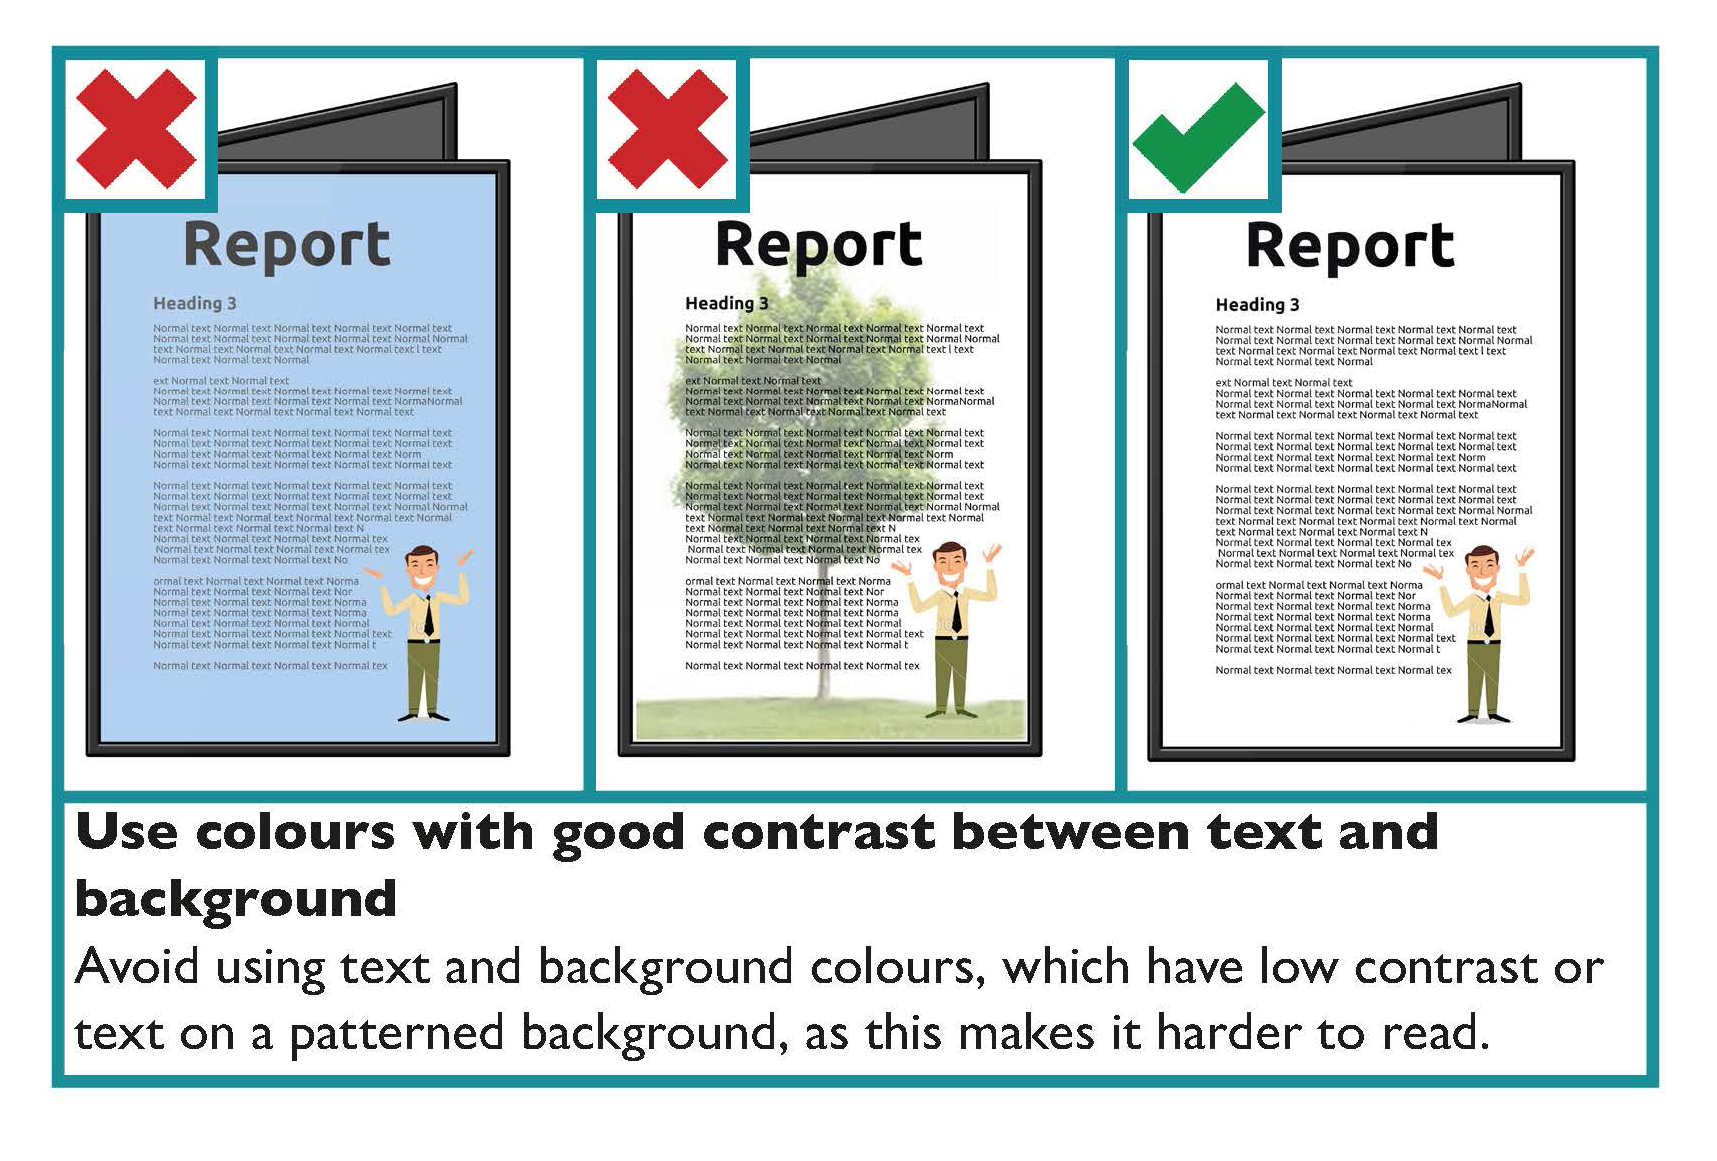 The image shows three examples of contrast between text and background colours. Avoid using text and background colours or patterns which have low contrast between the text and the background.